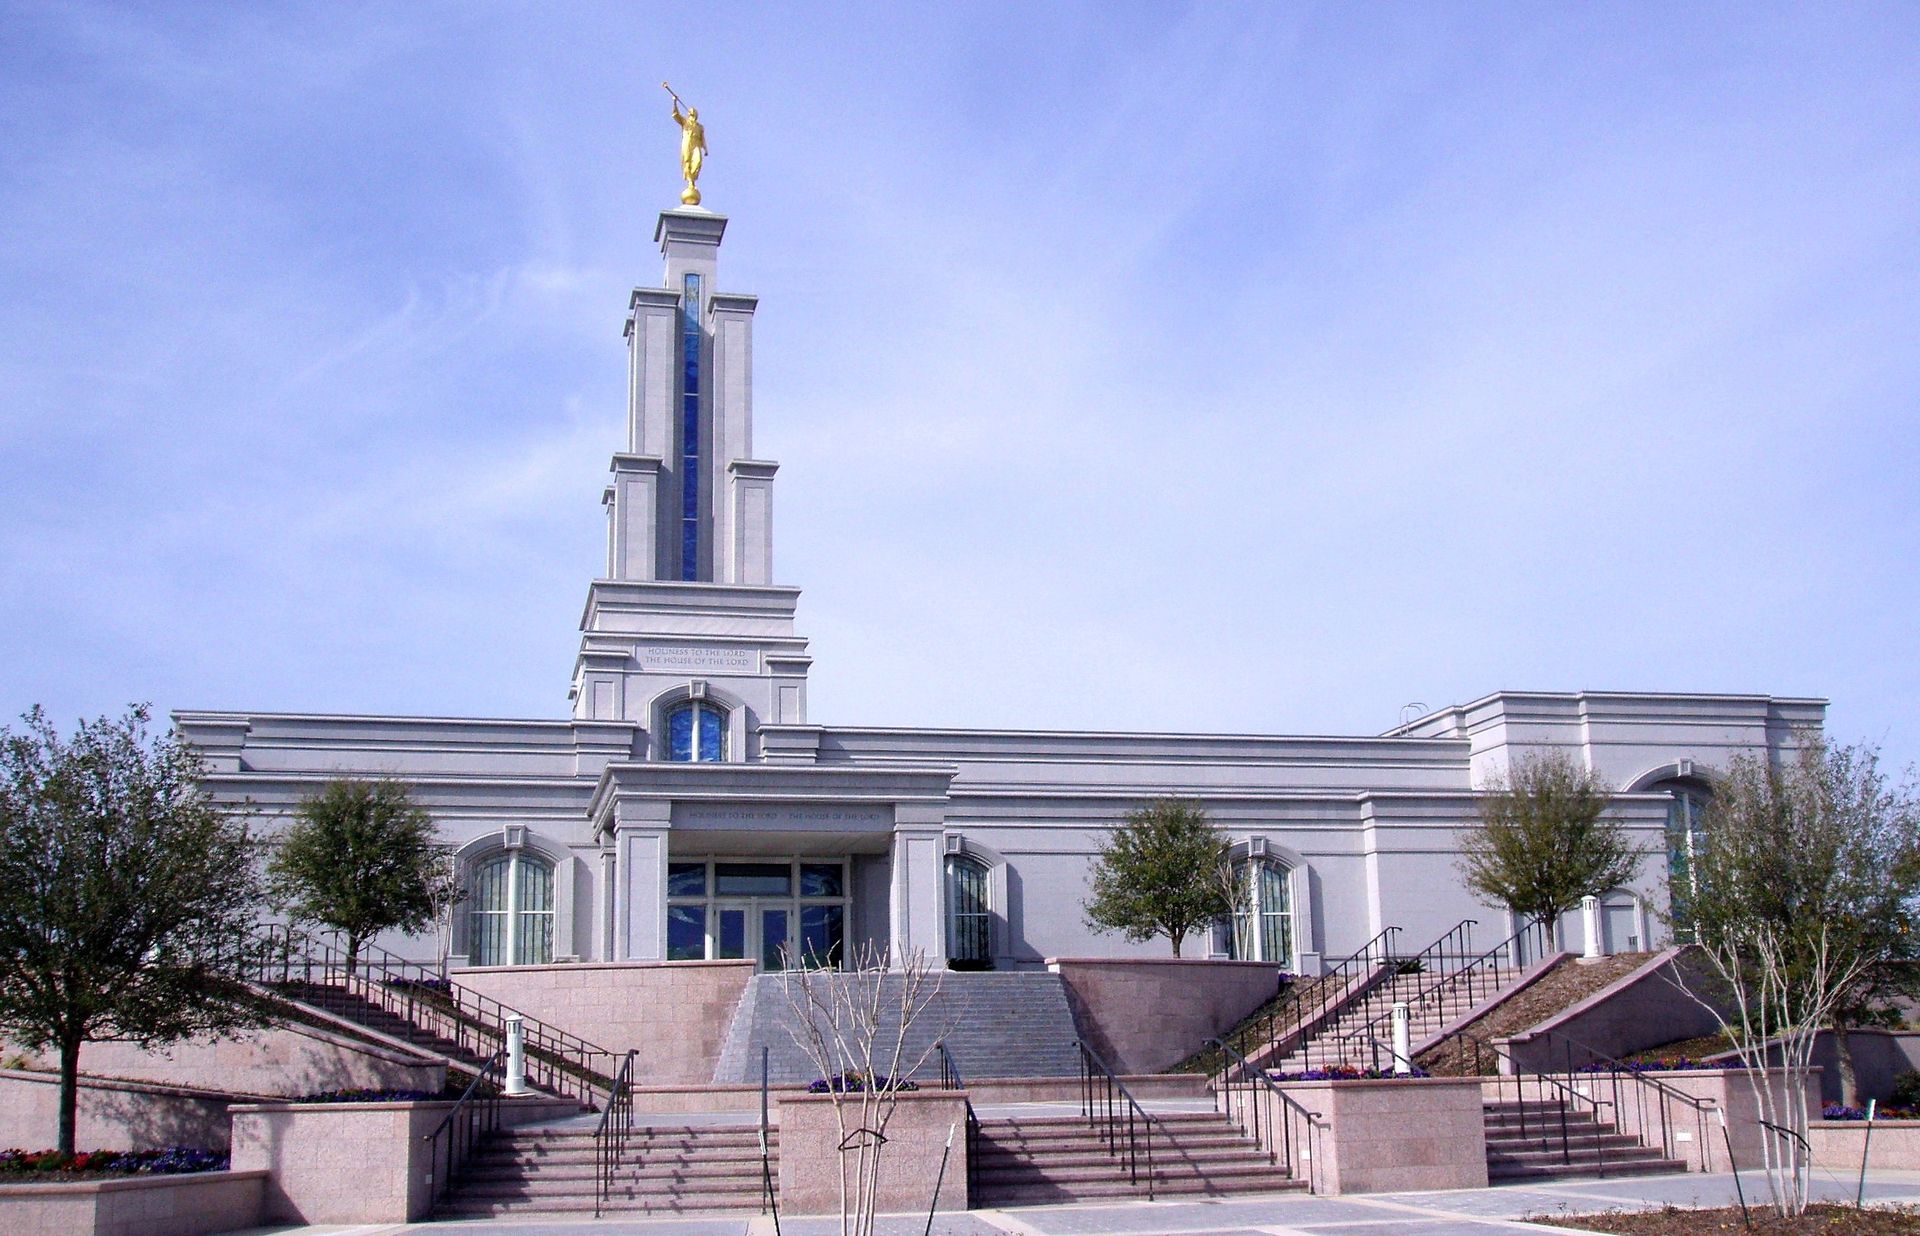 The San Antonio Texas Temple north view, including entrance and scenery.